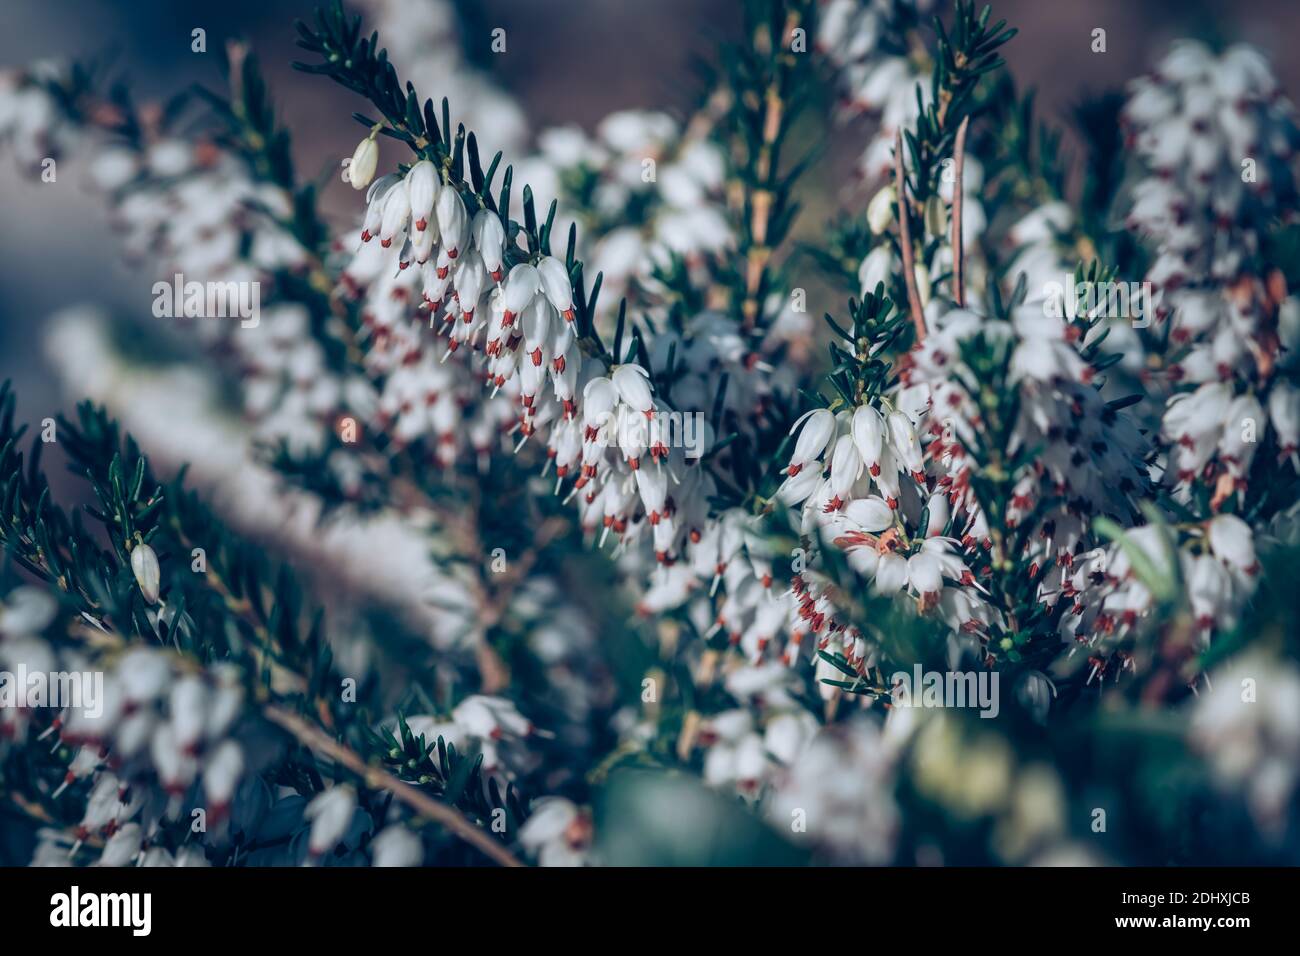 detail of white heather blooming flower Stock Photo